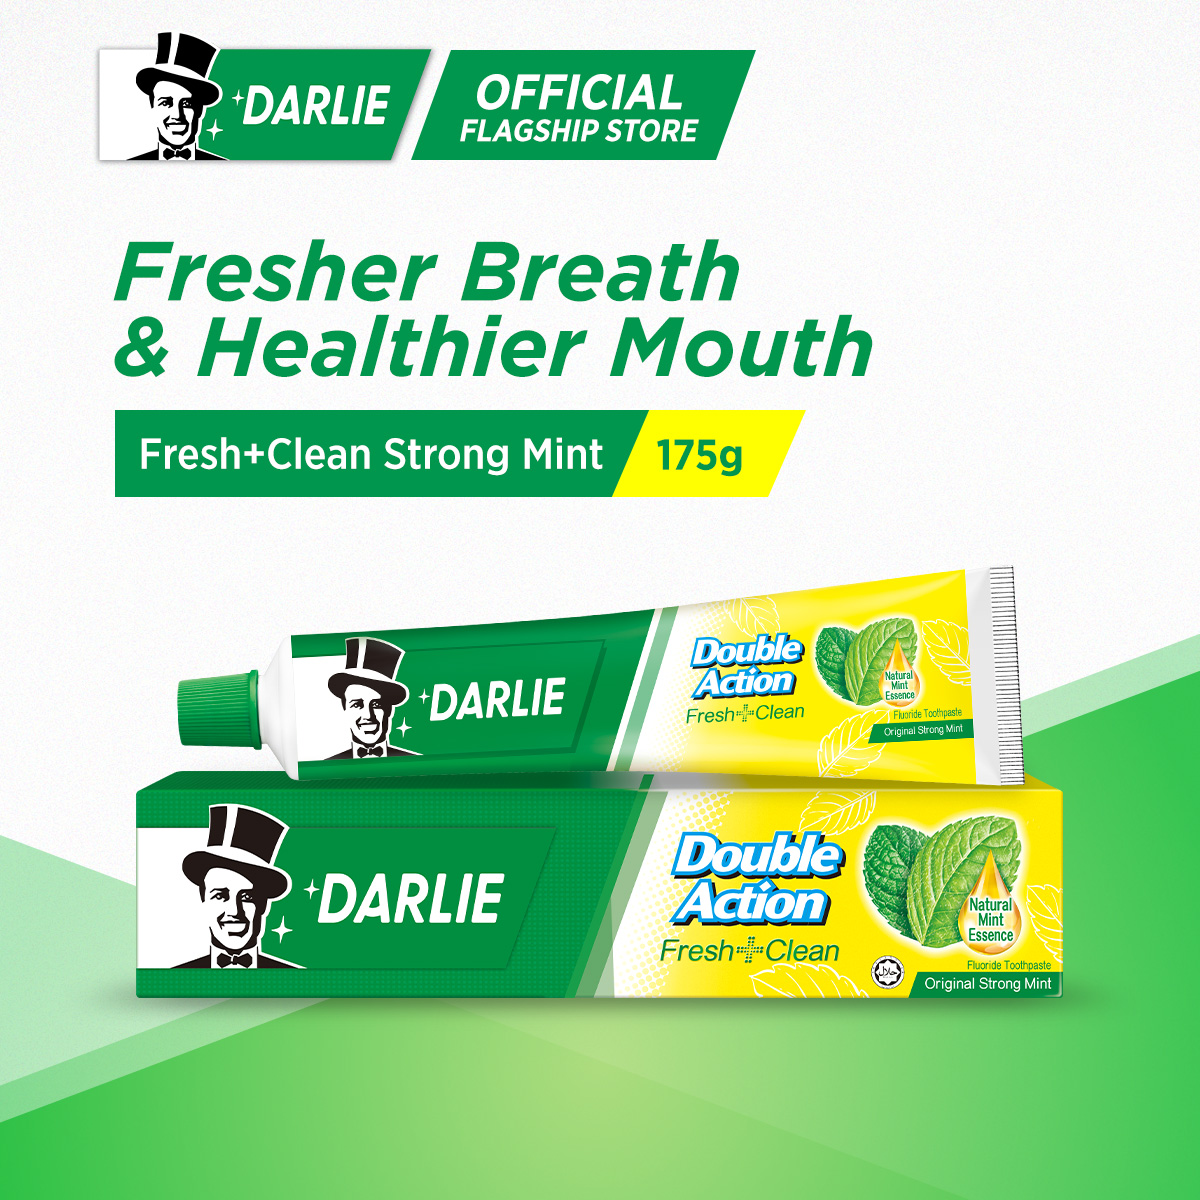 Darlie Double Action Fresh + Clean Toothpaste Original Strong Mint 175g